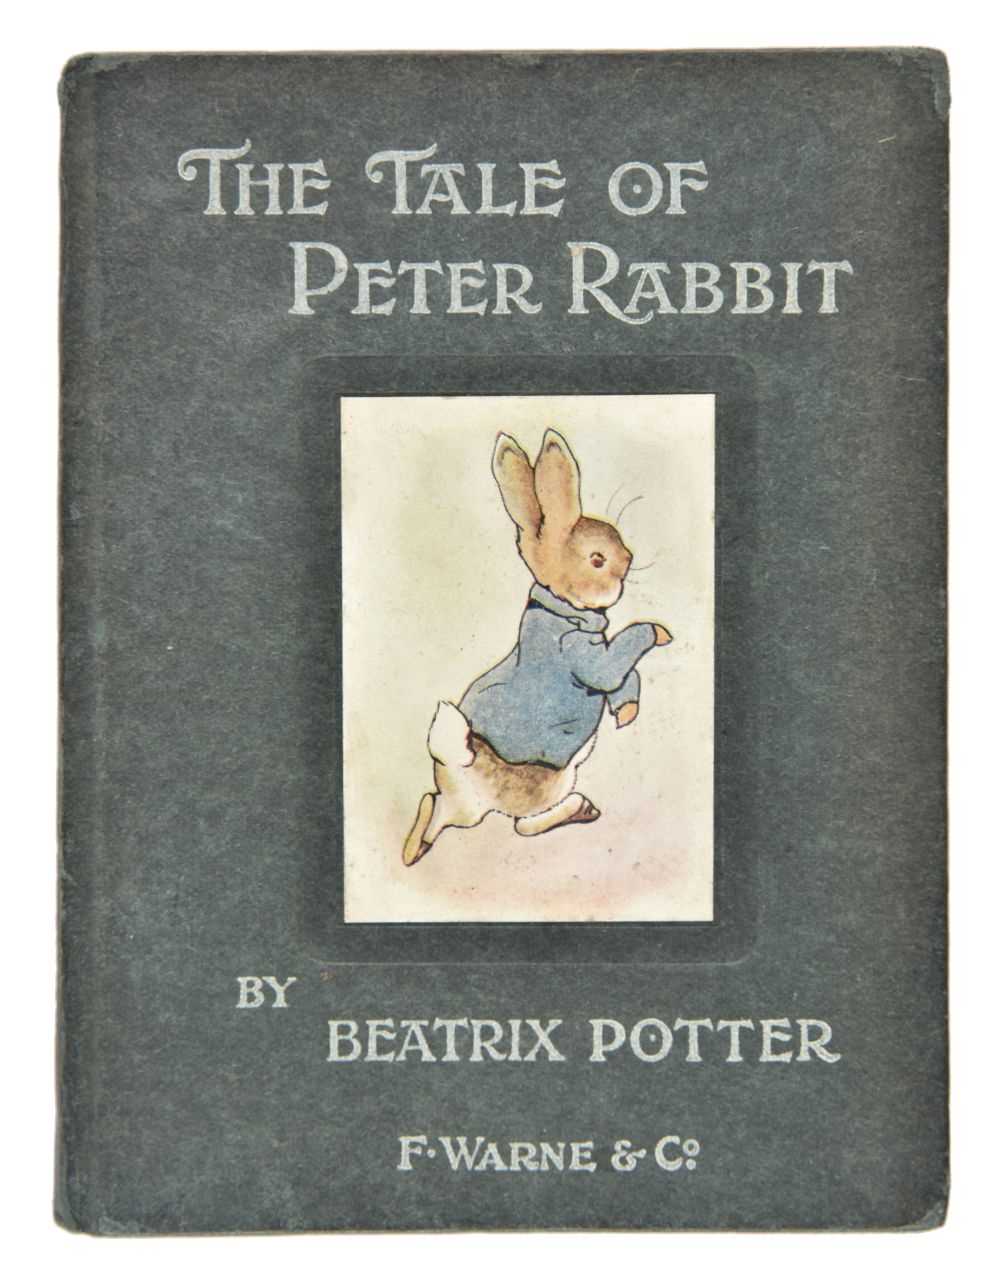 Lot 576 - Potter (Beatrix). The Tale of Peter Rabbit, 1st trade edition, [1902]